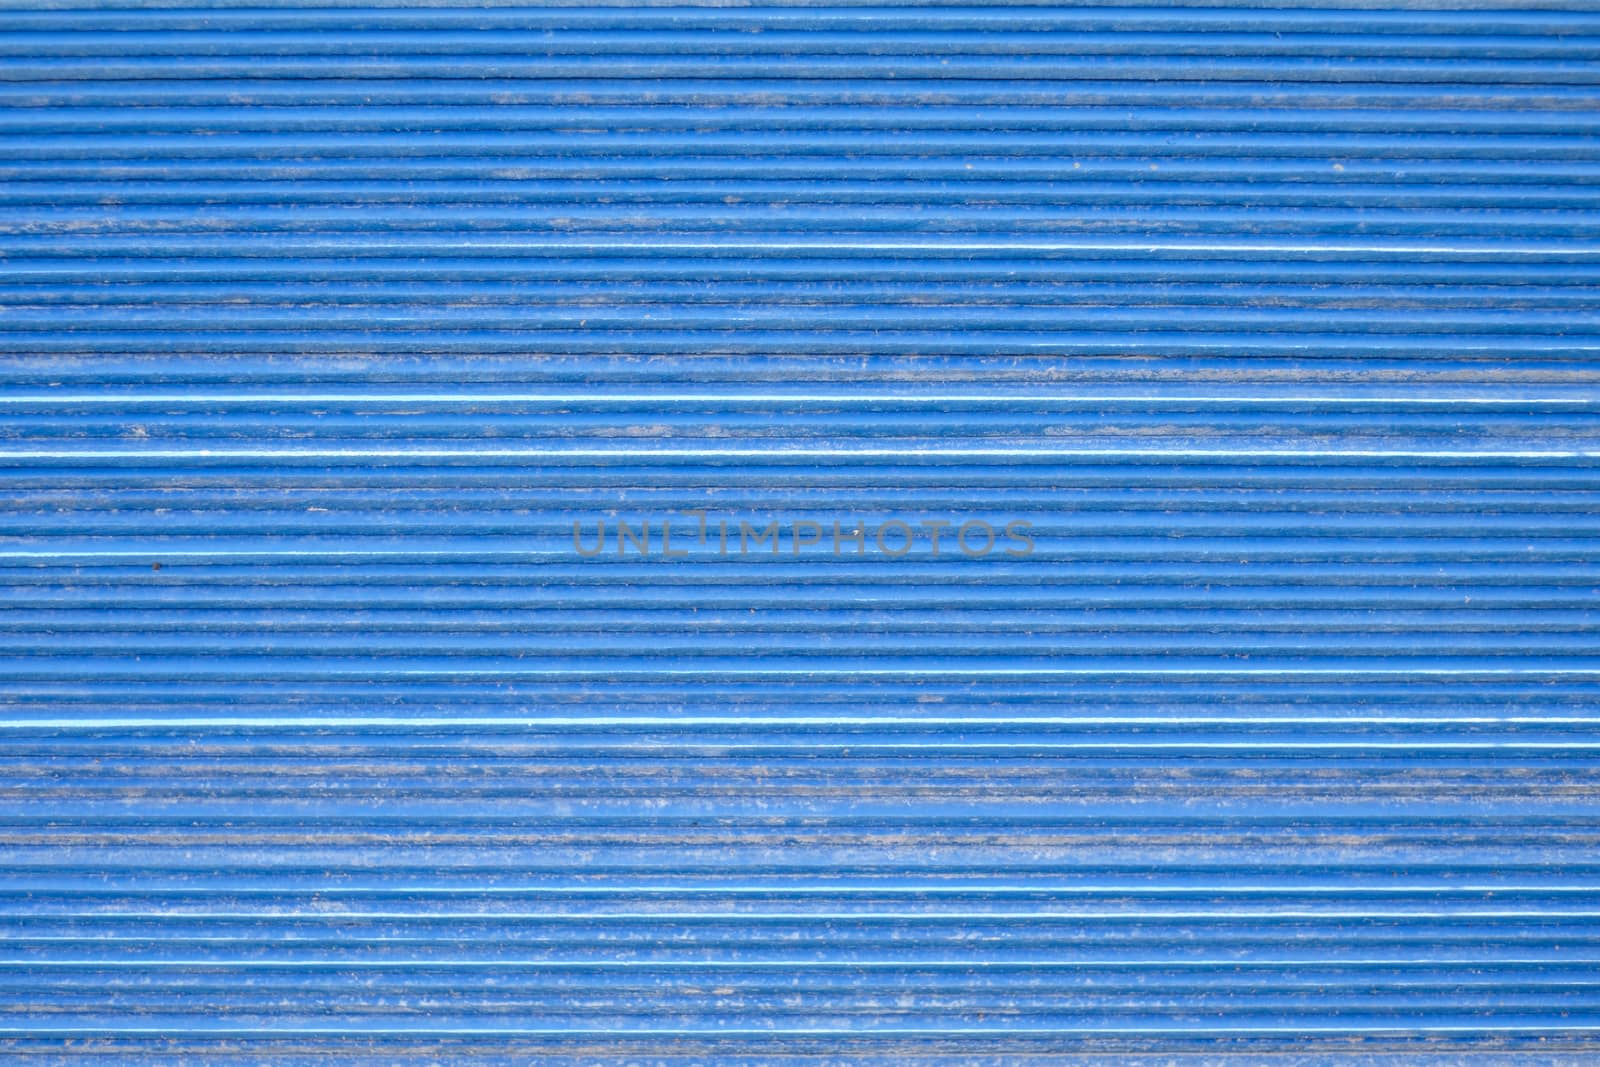 Blue old roof tiles arrange use for pattern and background